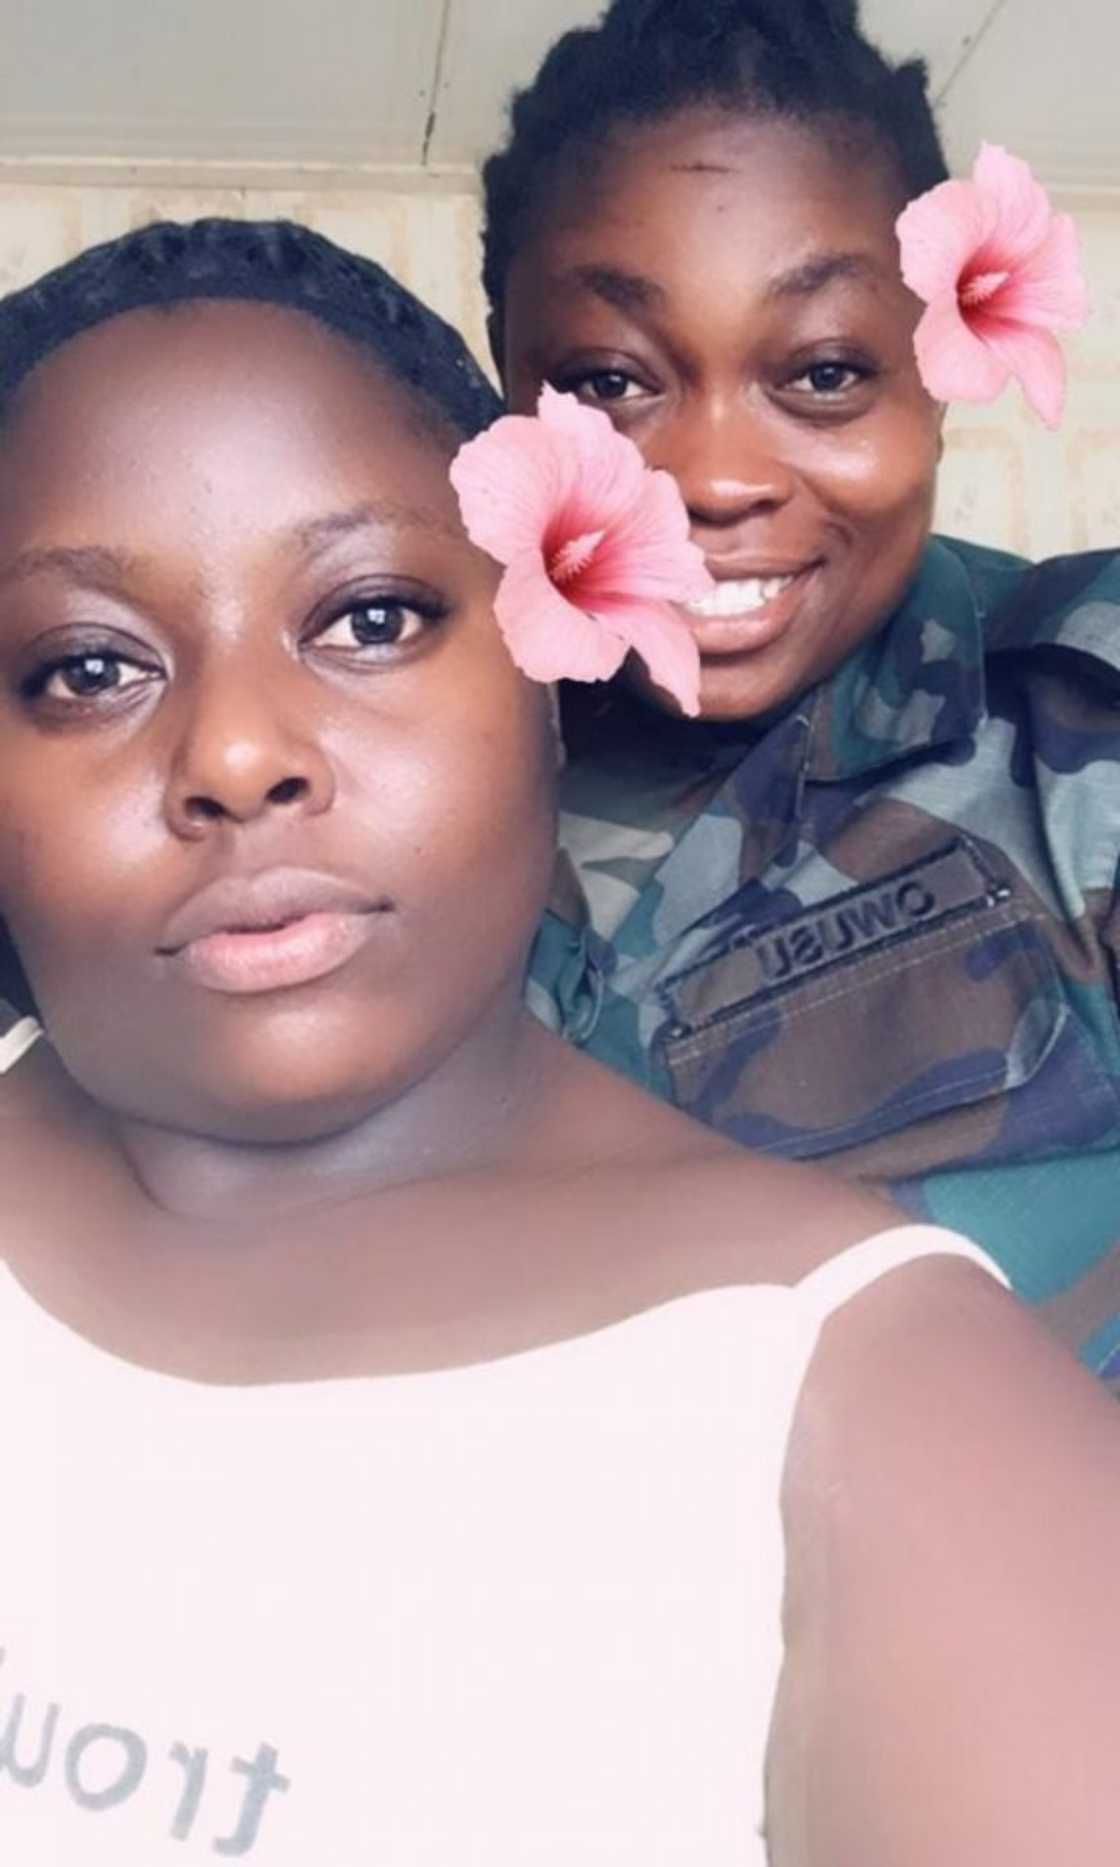 Lady in lesbian wedding video is reportedly a soldier; faces sanctions